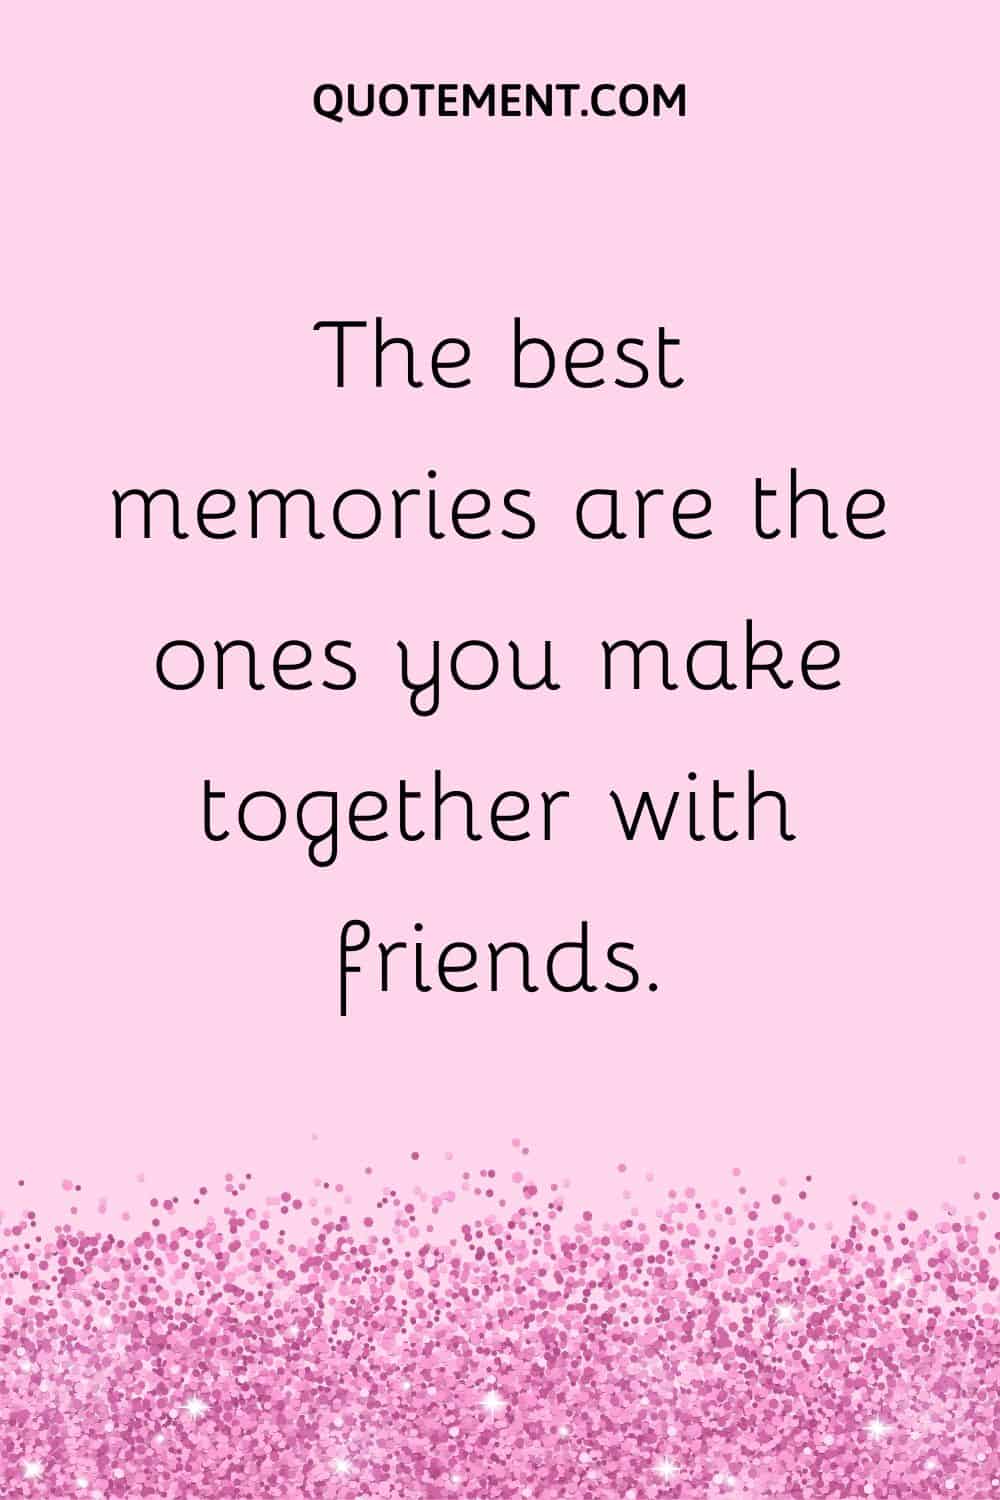 The best memories are the ones you make together with friends